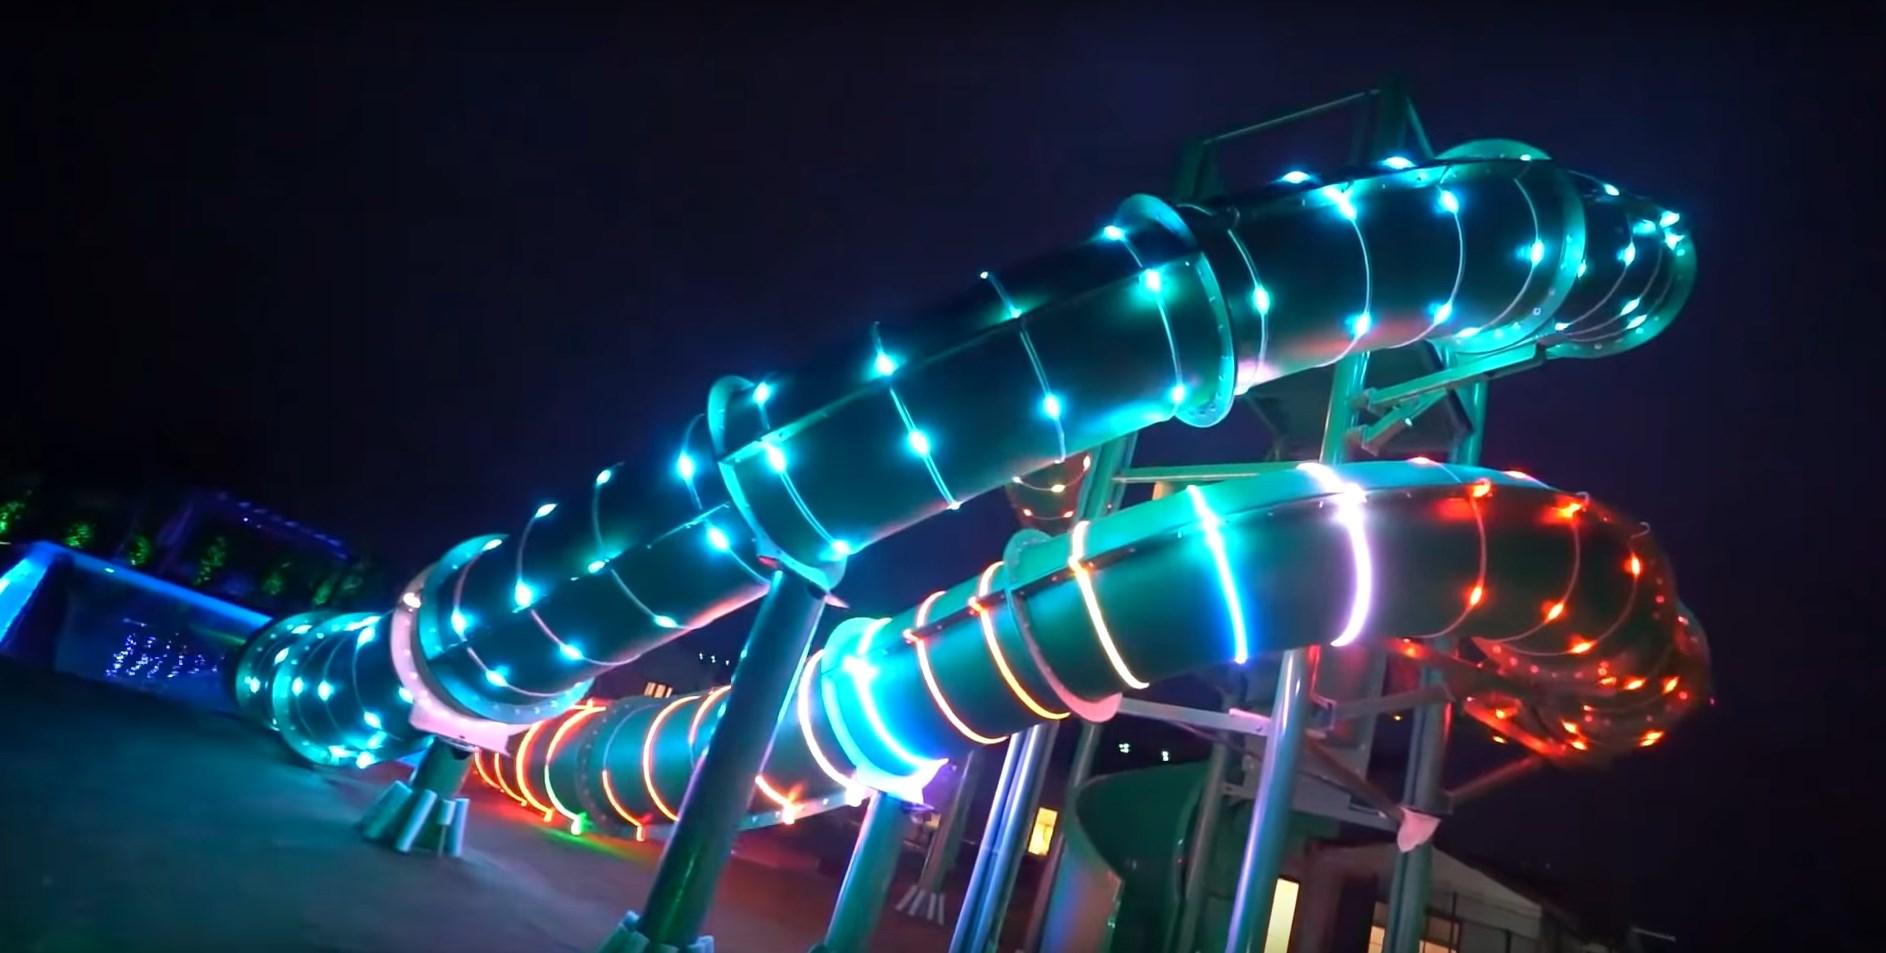 The waterslides lit up at night.